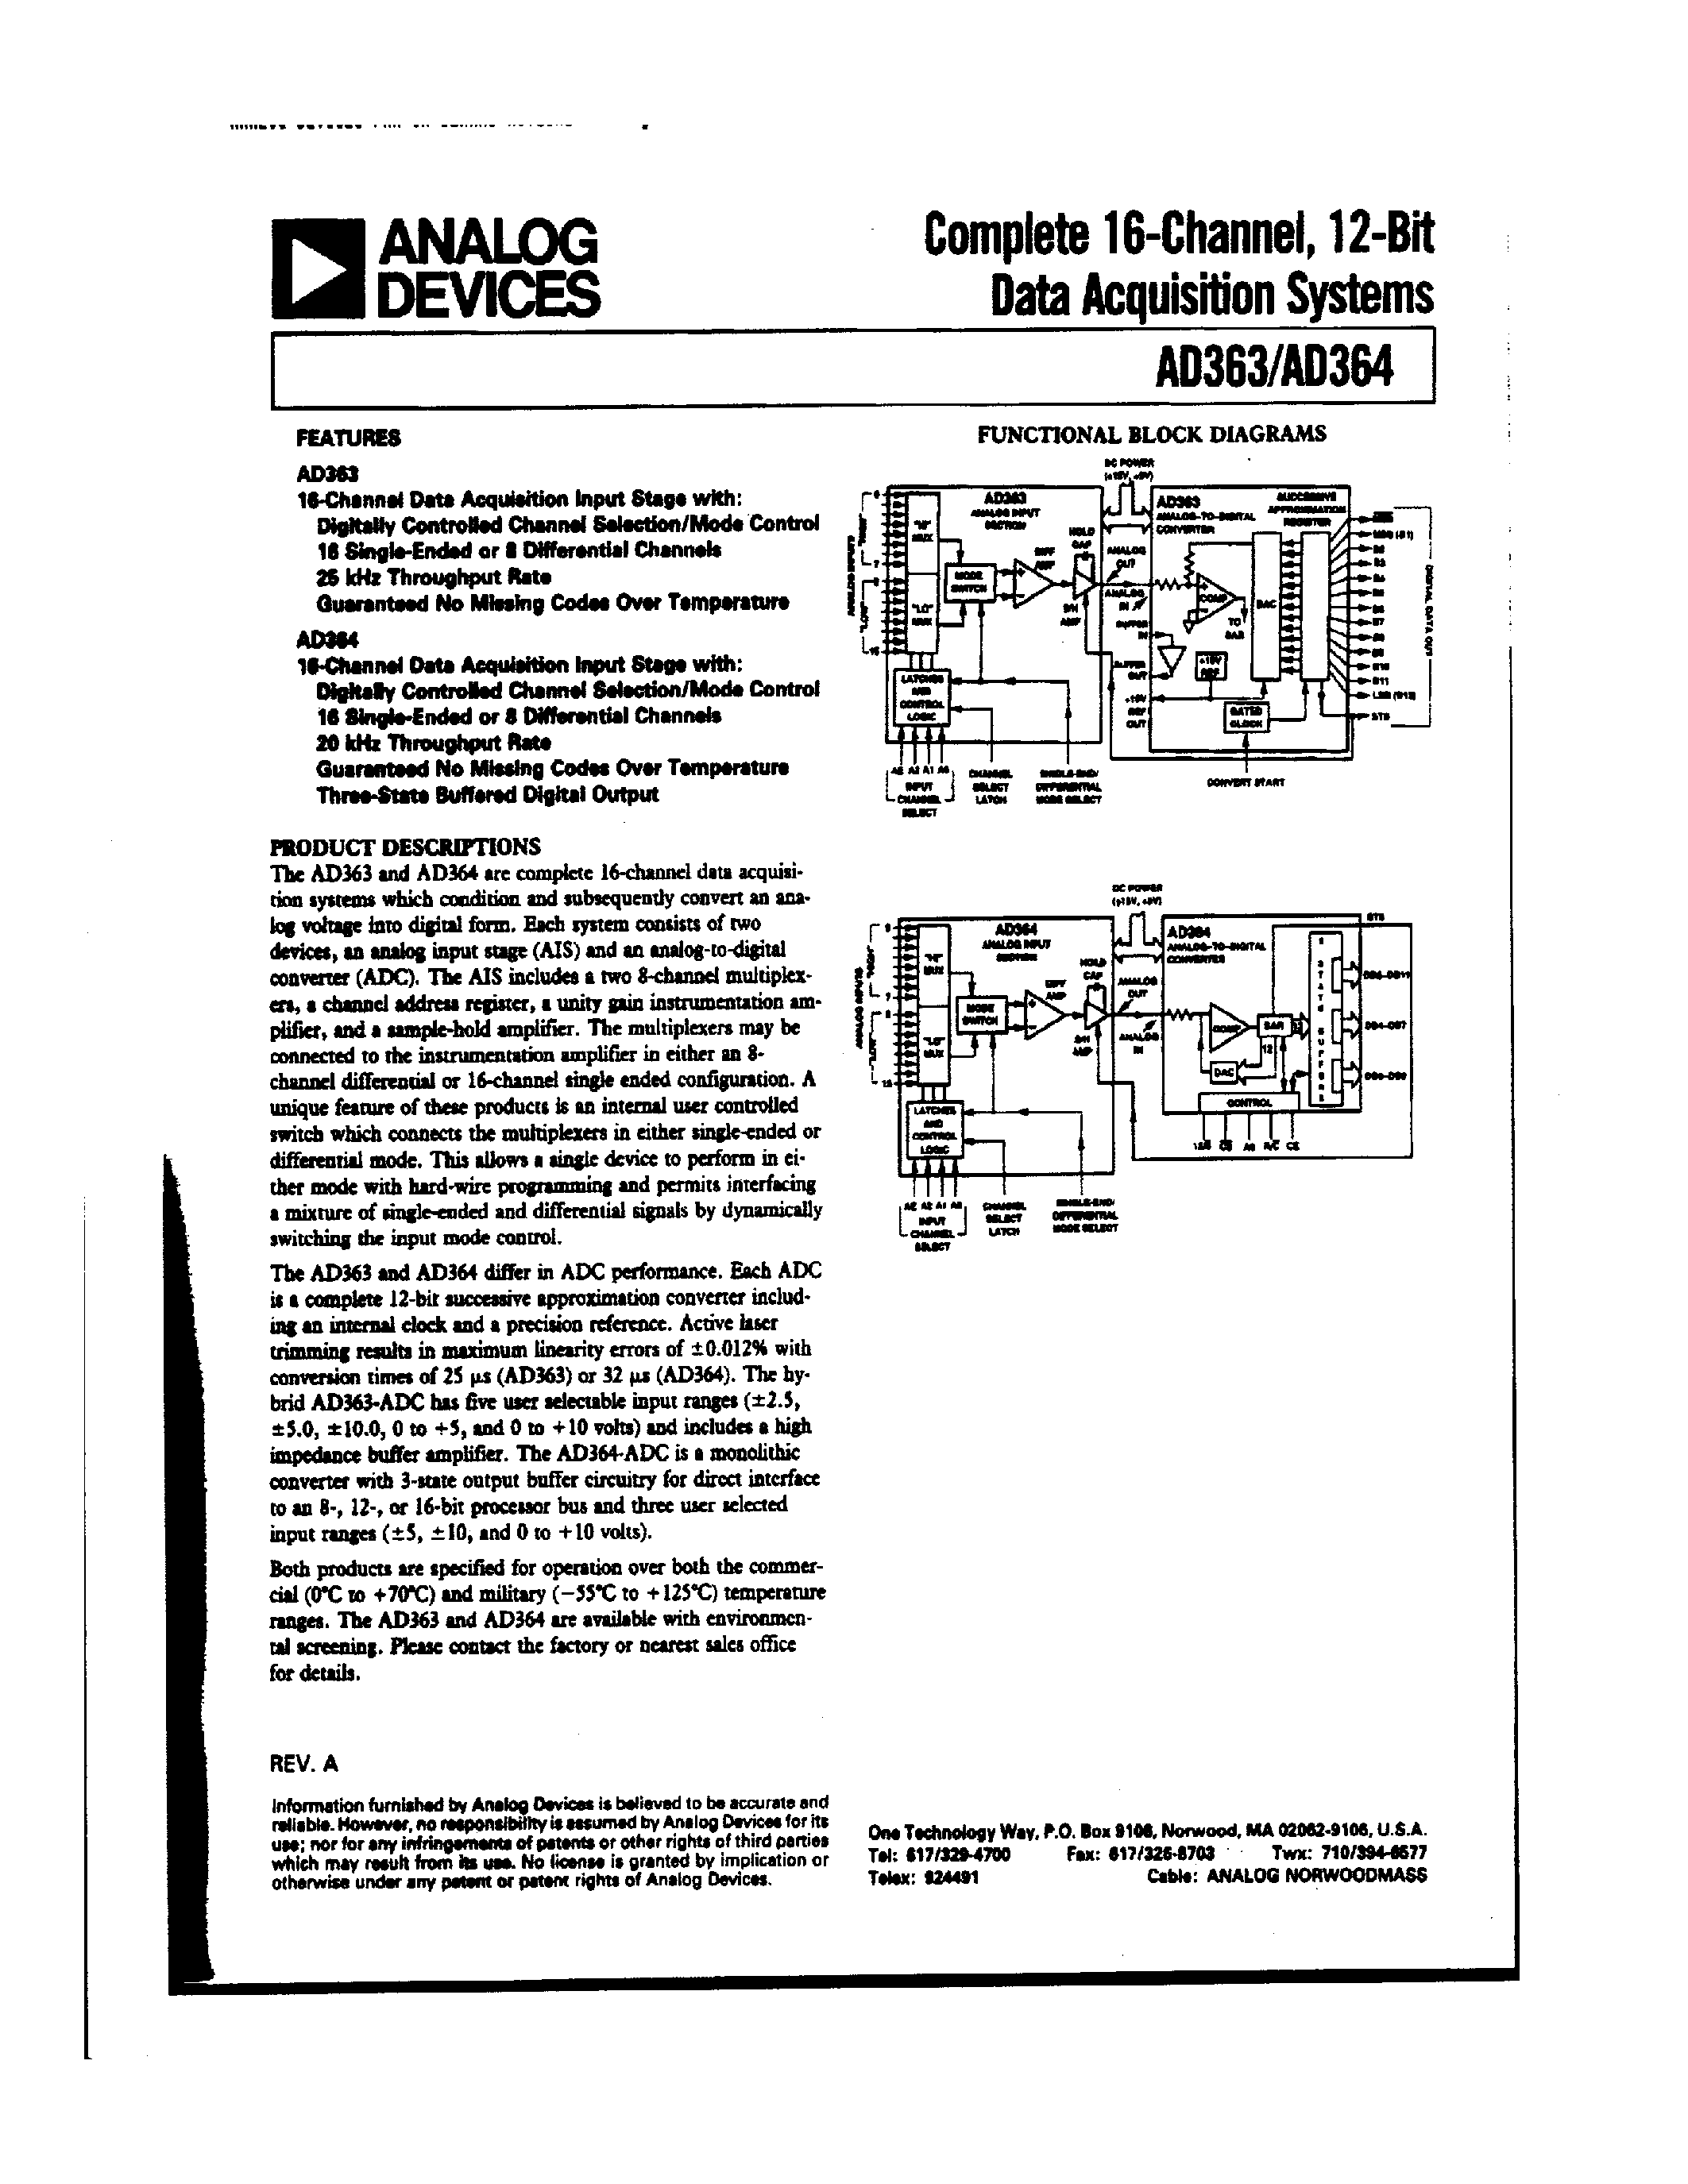 Datasheet AD364RJ - Complete 16-Channel/12-Bit Data Acquisition System page 1